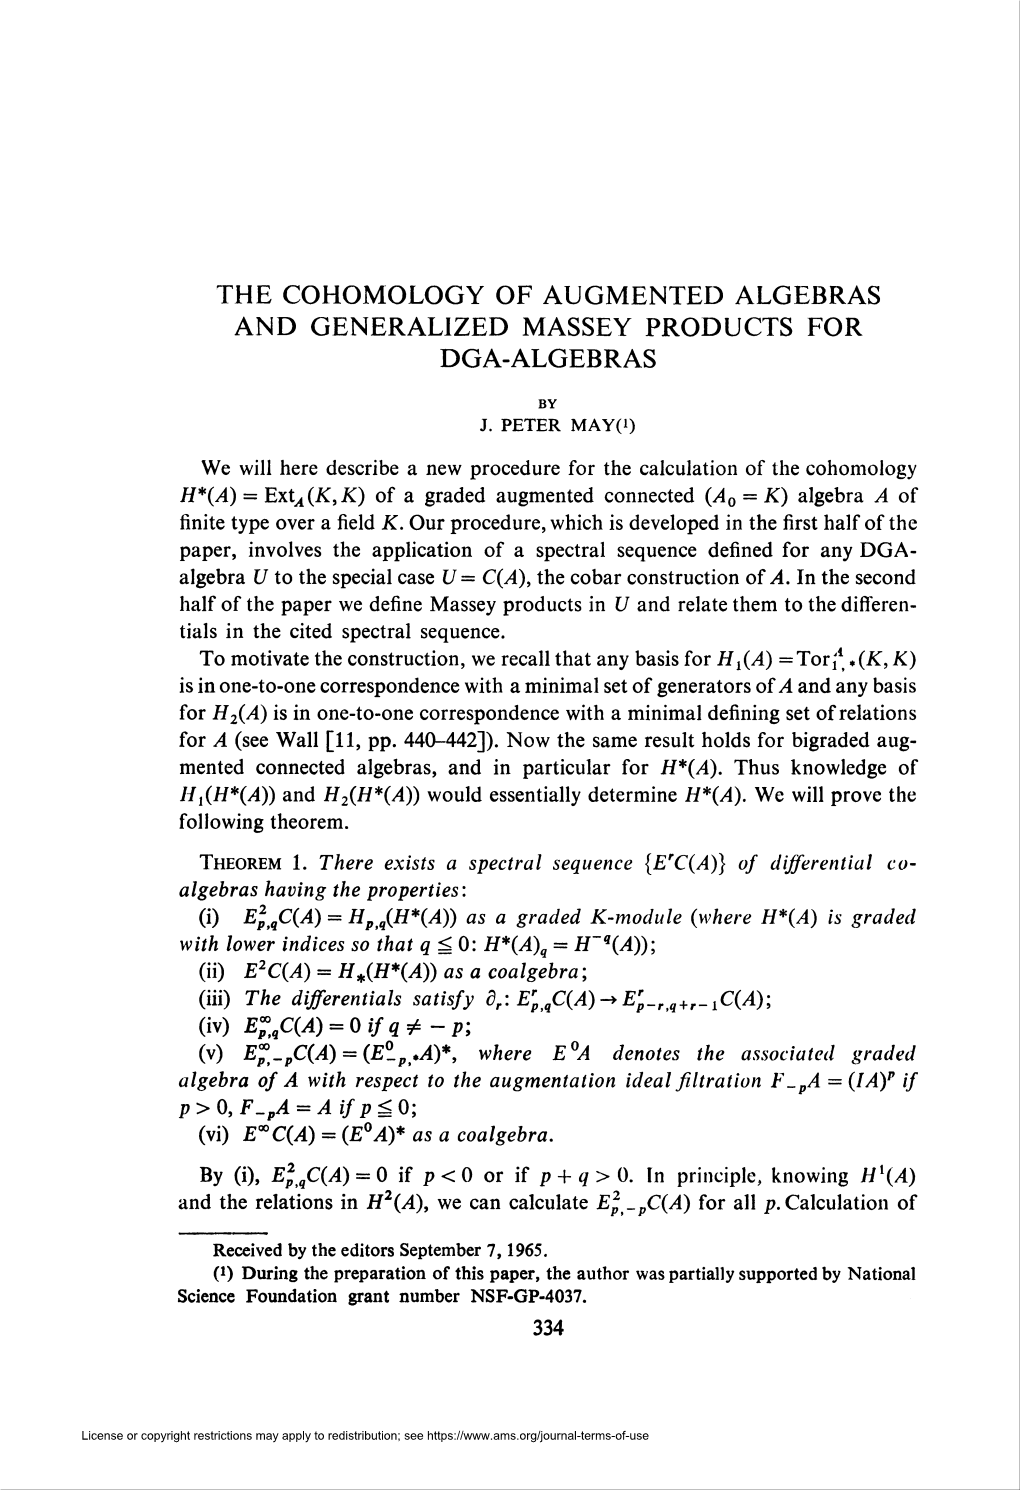 The Cohomology of Augmented Algebras and Generalized Massey Products for Dga-Algebras